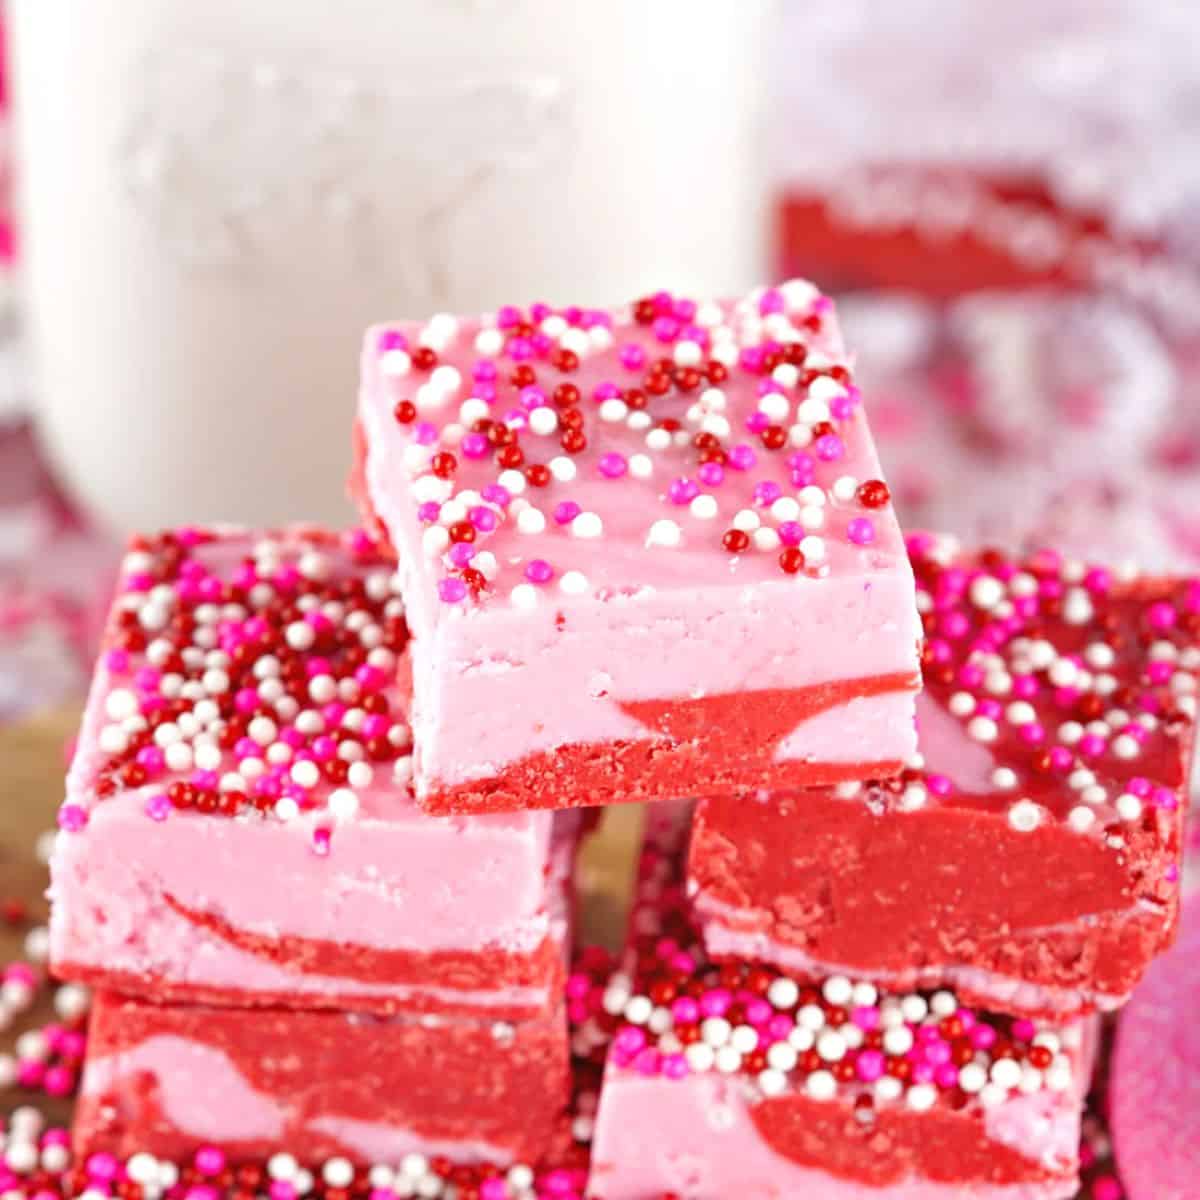 stawberry flavored Fudge